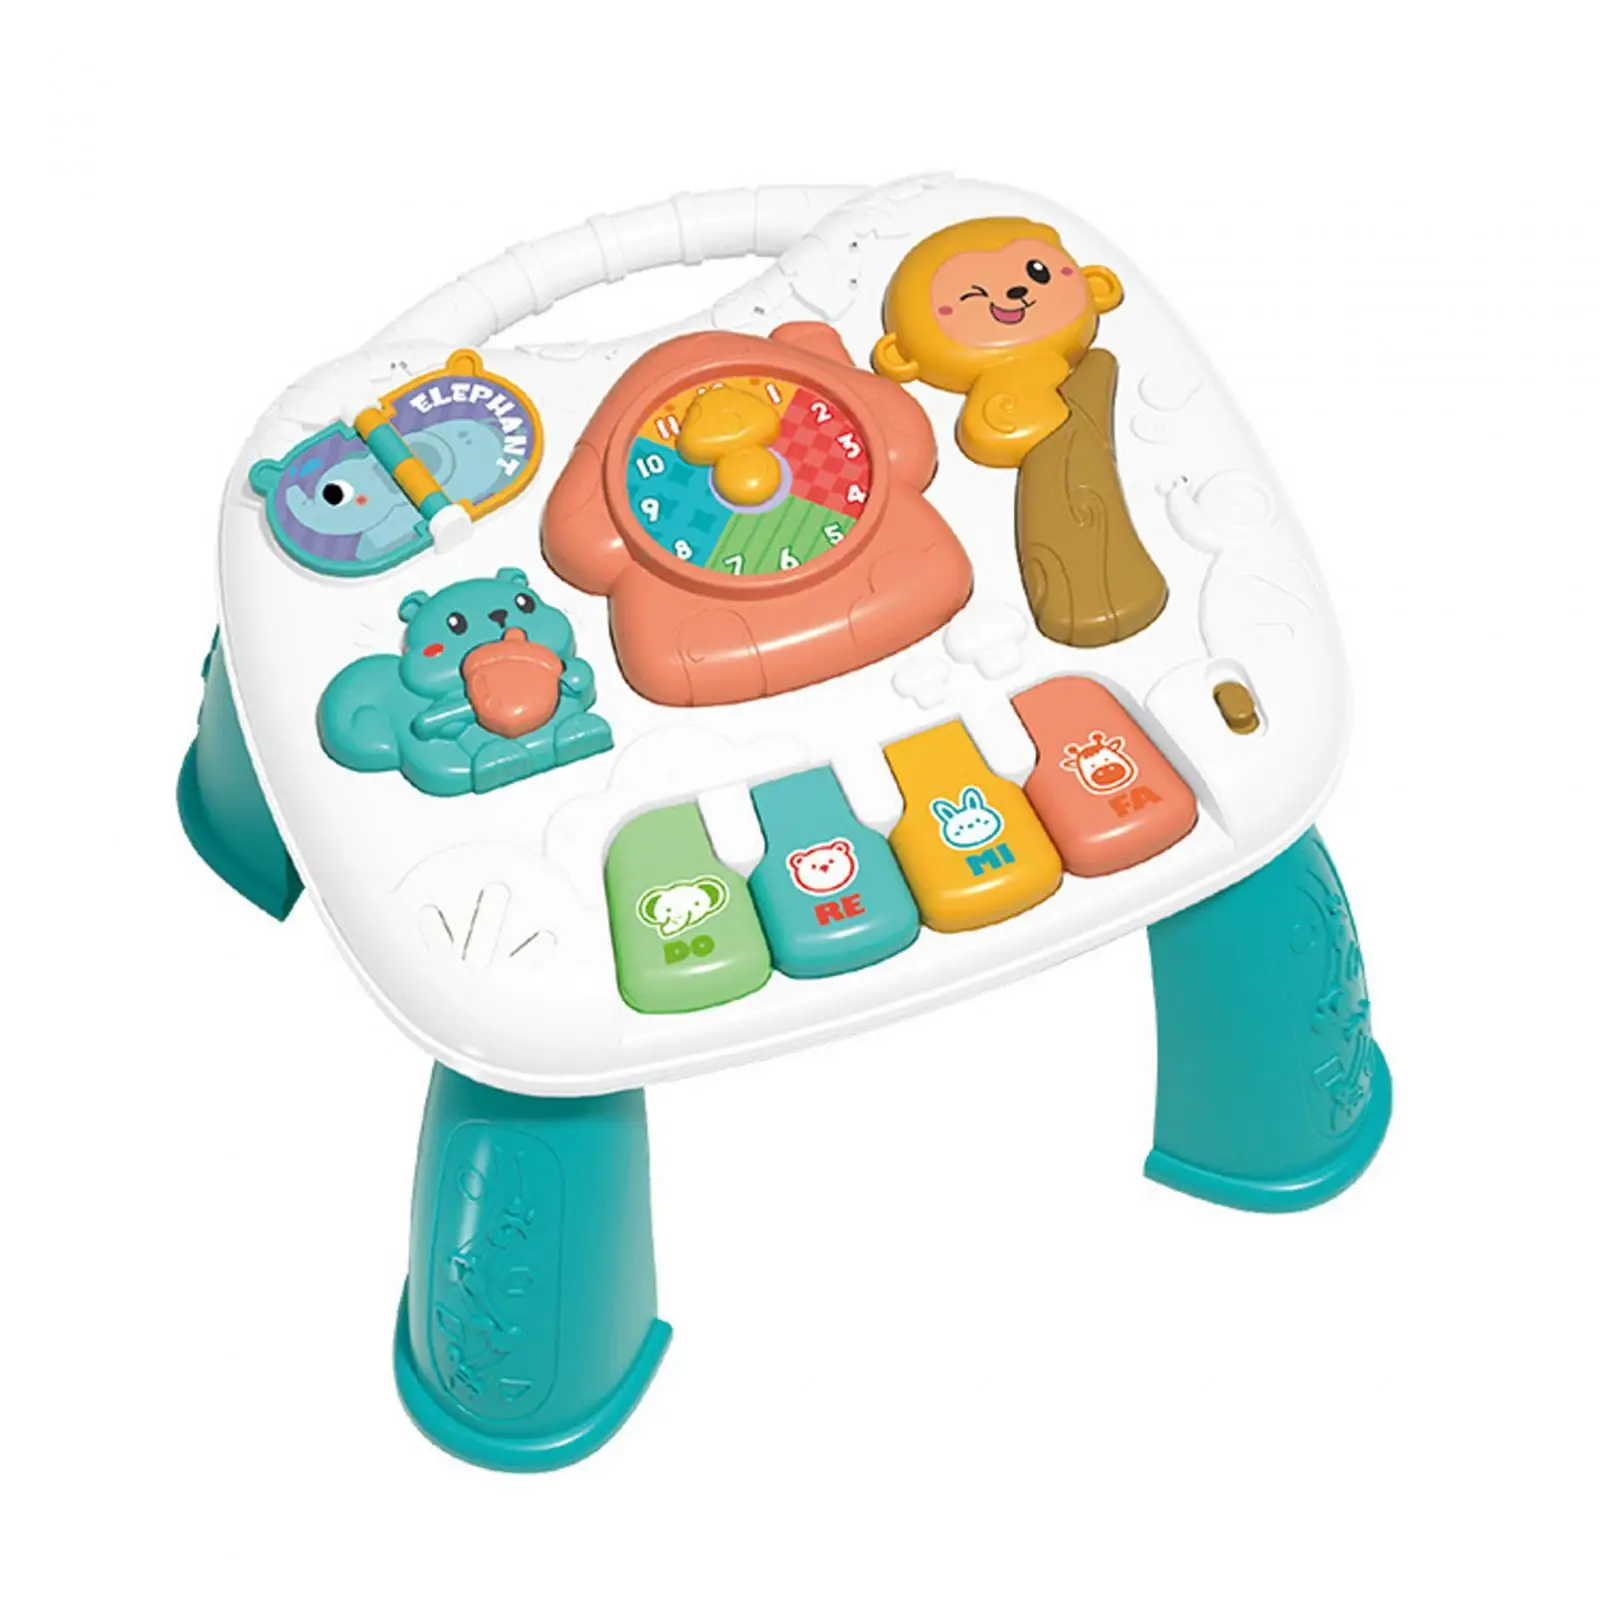 Musical Learning Table Toddlers Educational Learning Toys Kids Boys Girls Discovering Portable Music Activity Center Table